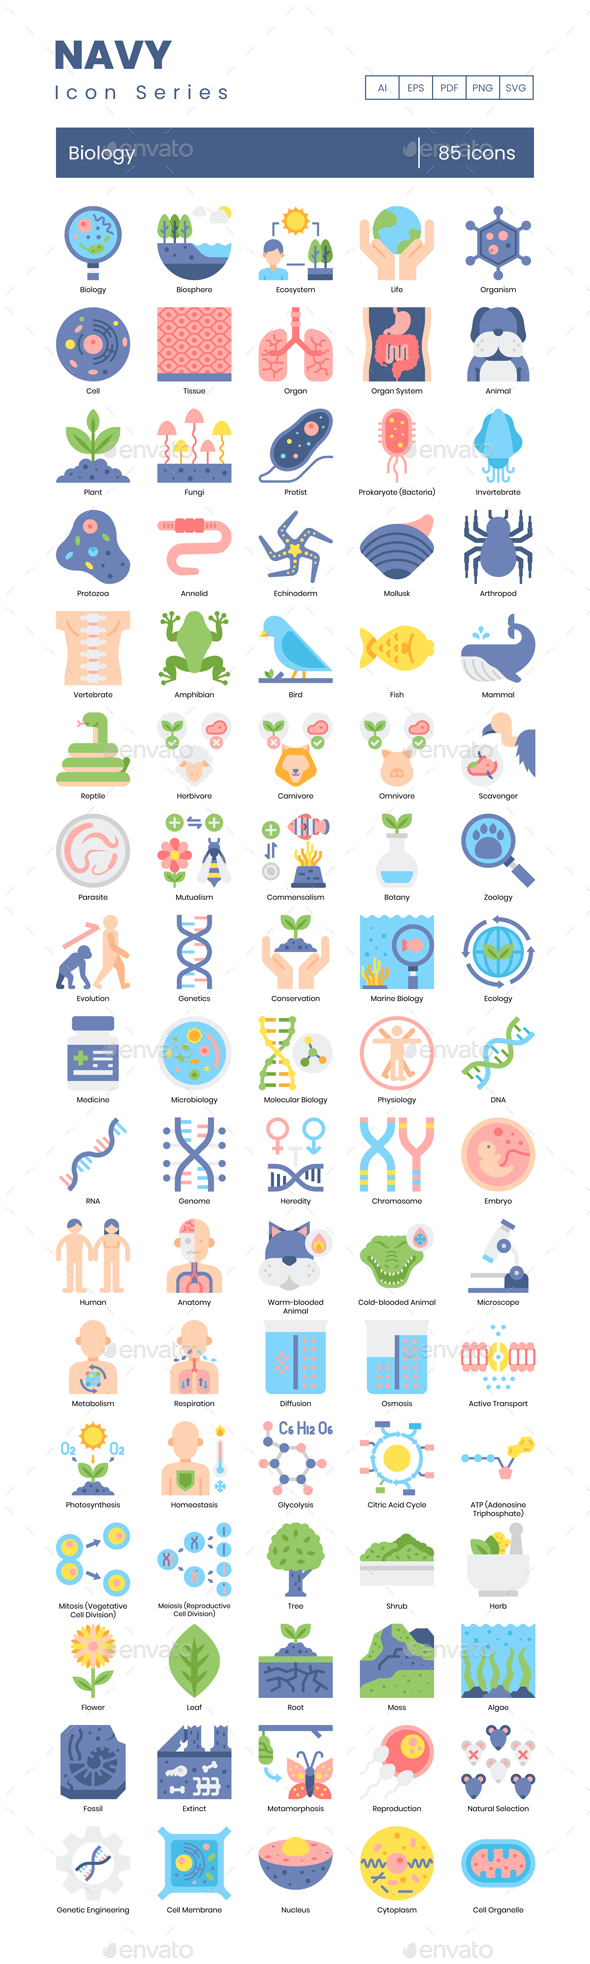 [DOWNLOAD]85 Biology Icons | Navy Series